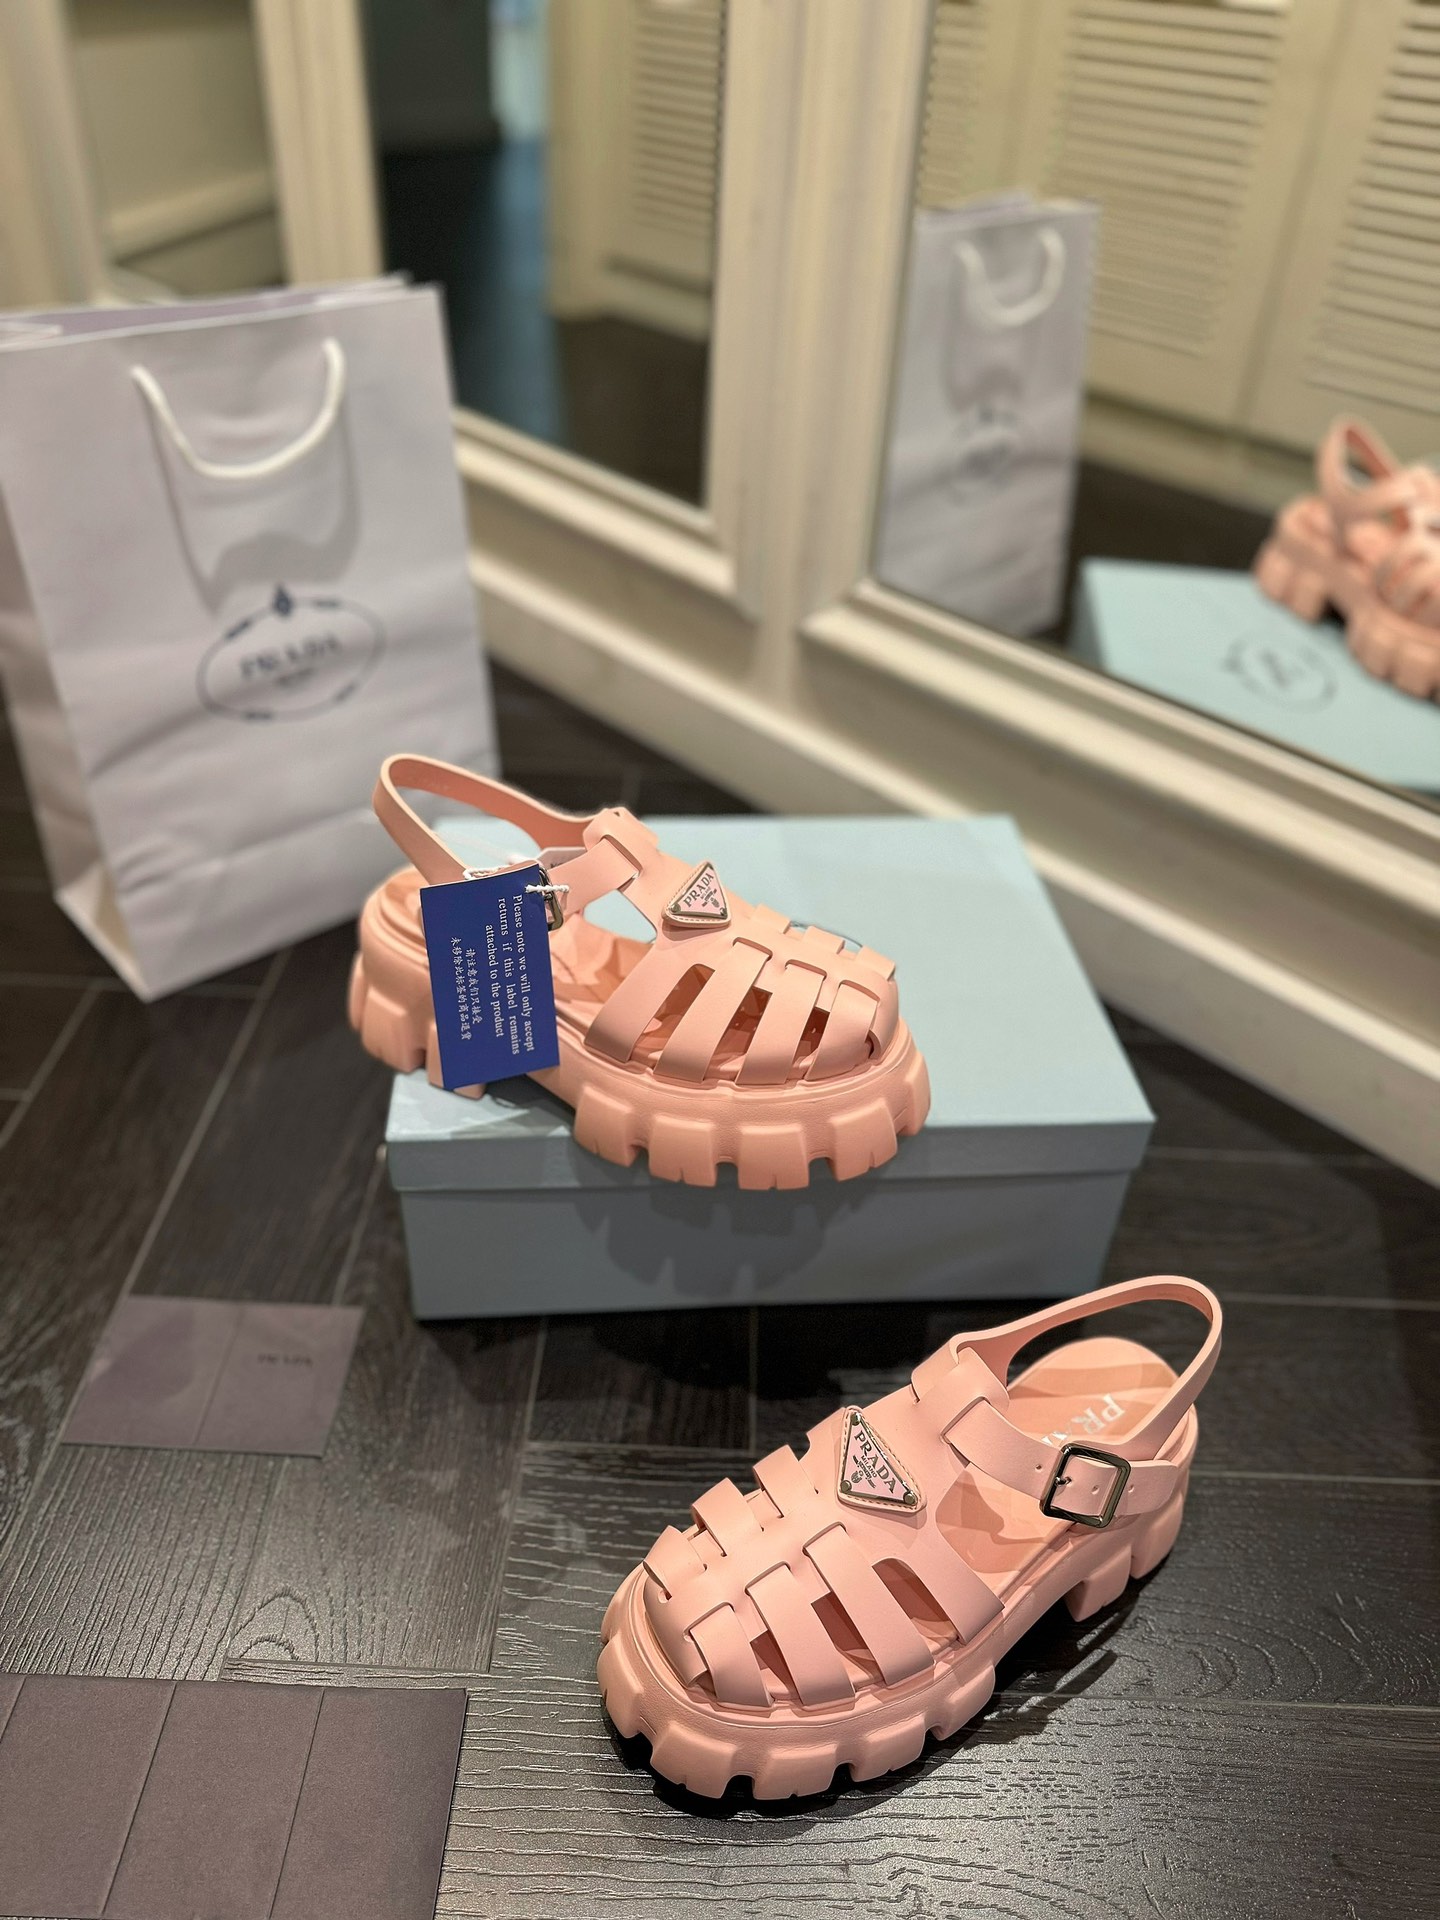 Prada Shoes Sandals Apricot Color Black Pink White Weave Spring/Summer Collection Vintage Beach